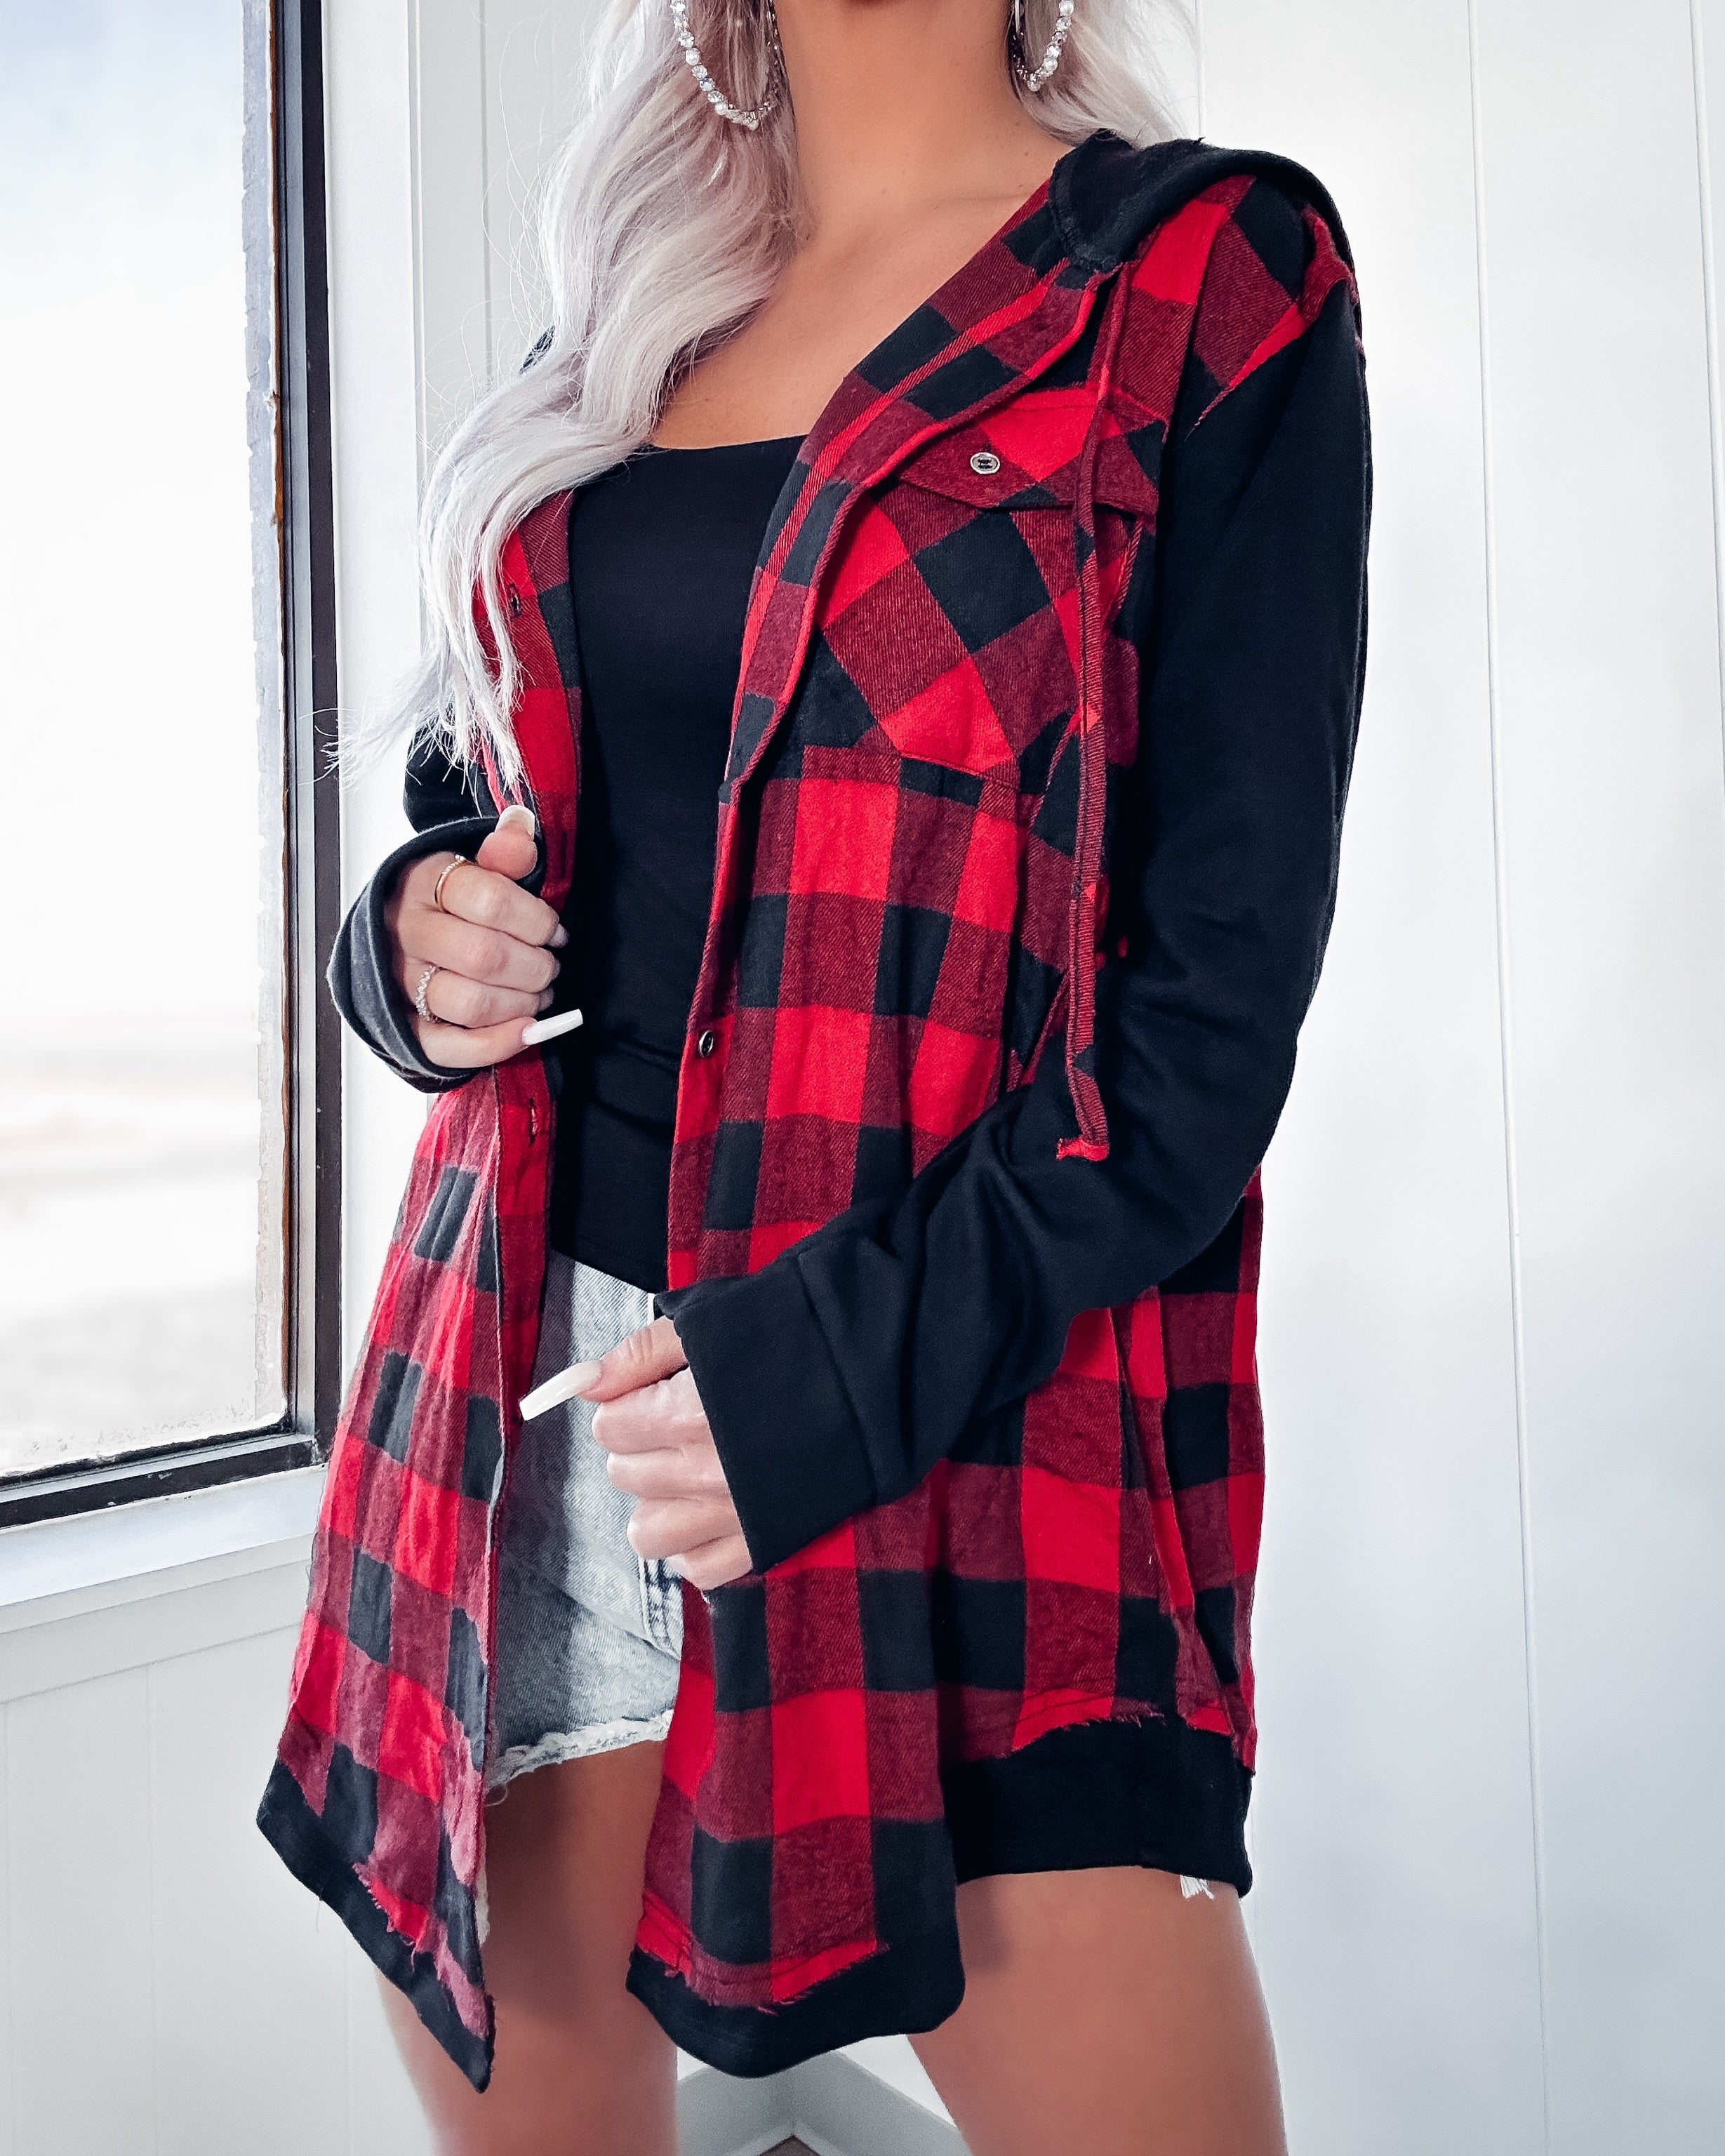 Main Stay Hooded Flannel - Red/Black